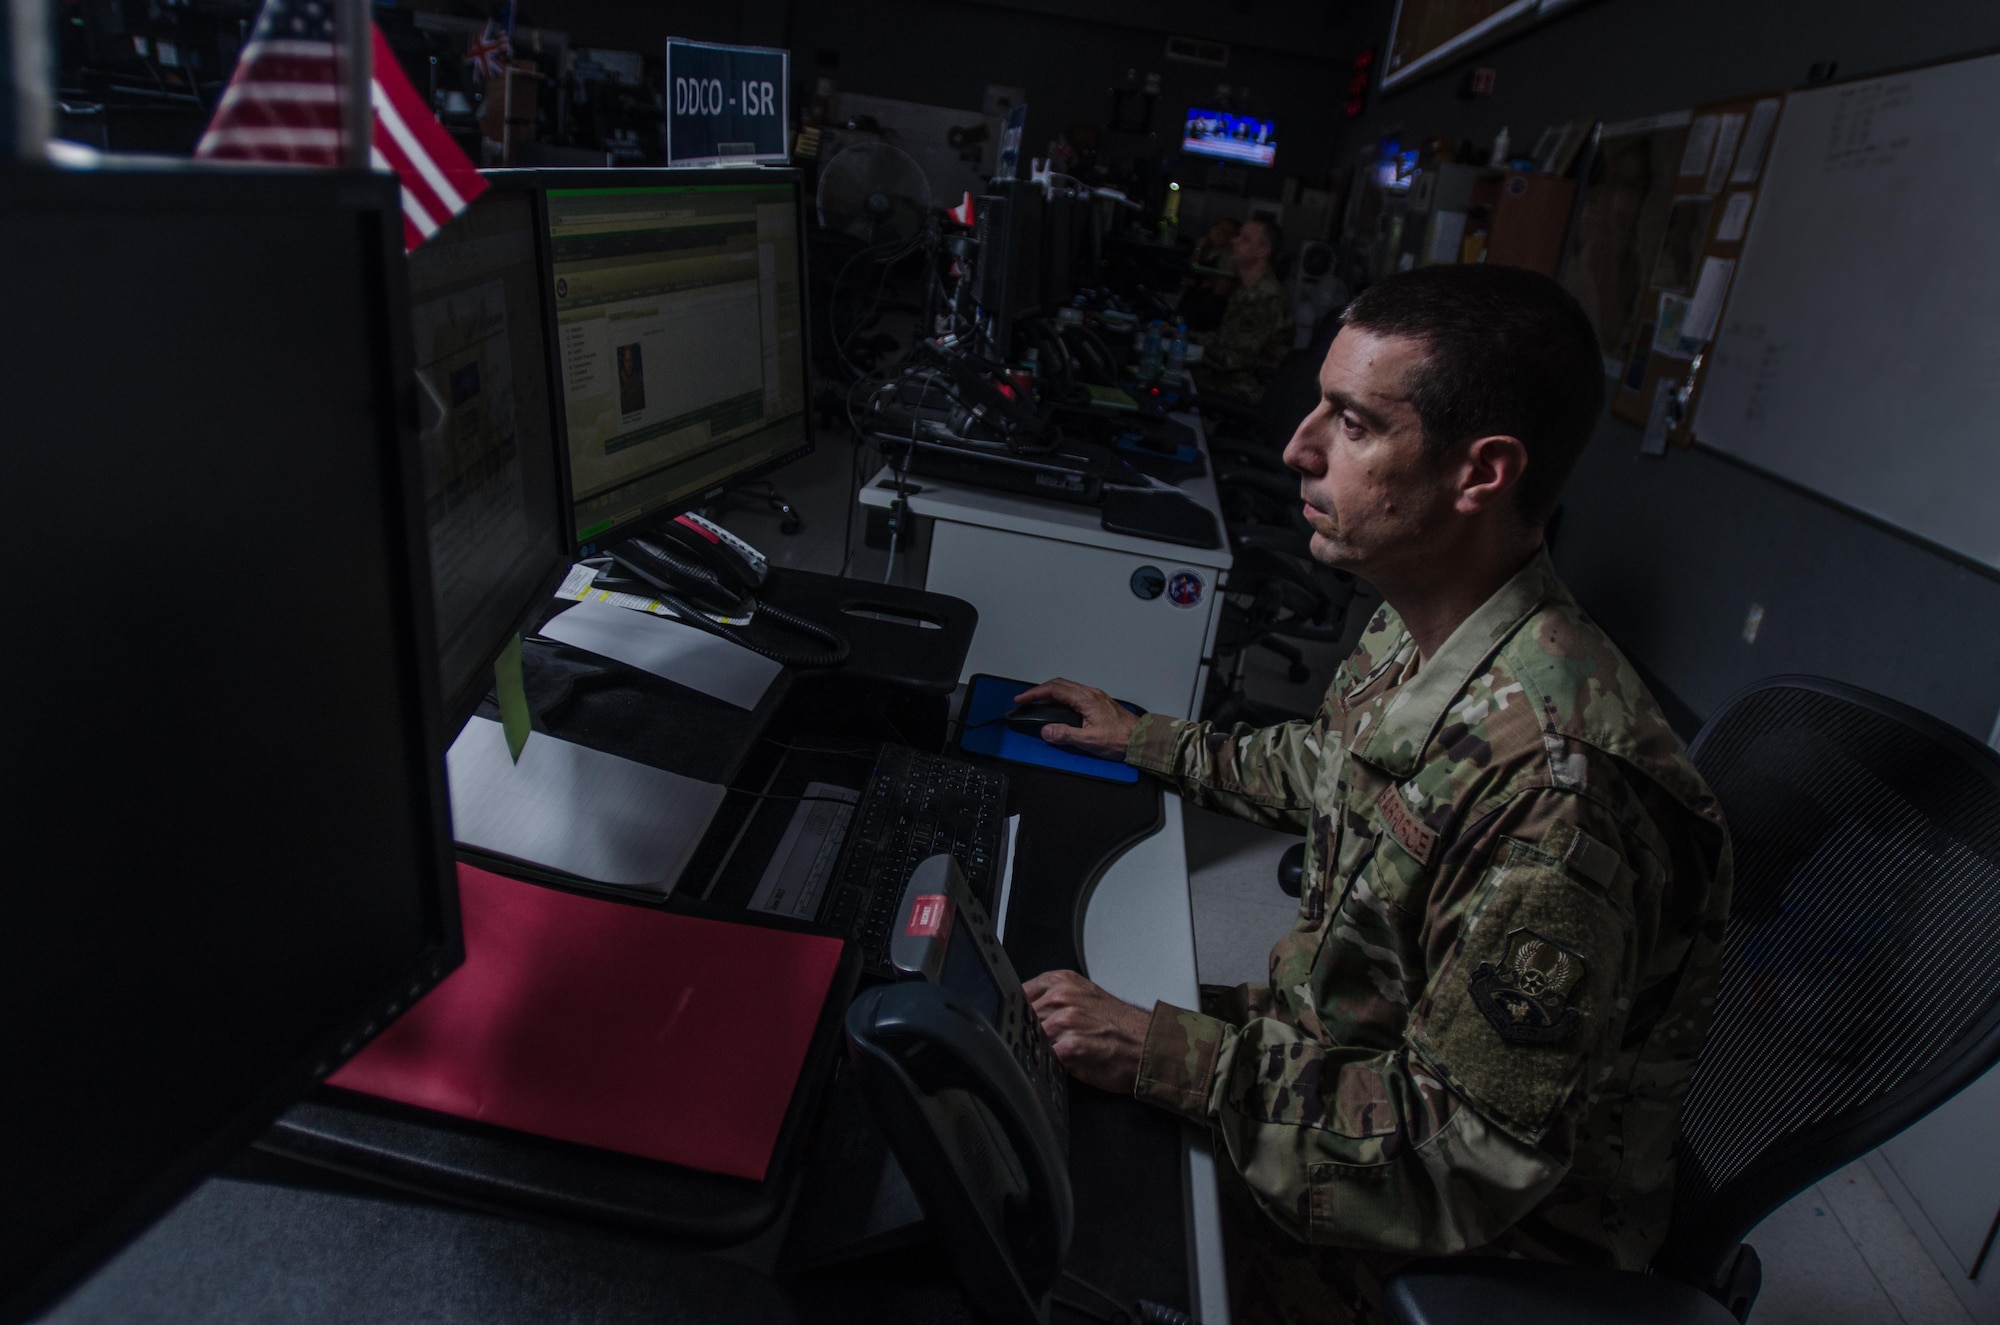 An Airman assigned to the 609th Air Operations Center works on the combat operations division floor at the Combined Air Operations Center at Al Udeid Air Base, Qatar, June 16, 2017. Despite Hurricane Florence hitting South Carolina last week, Airmen assigned to the 609th AOC Detachment 1 at Shaw Air Force Base, South Carolina, continued operations without interruption in support of U.S. Central Command military operations. AFCENT has adopted a distributed command and control model for operations, meaning organizations at multiple locations enable combat operations. (U.S. Air Force photo by Staff Sgt. Alexander W. Riedel)